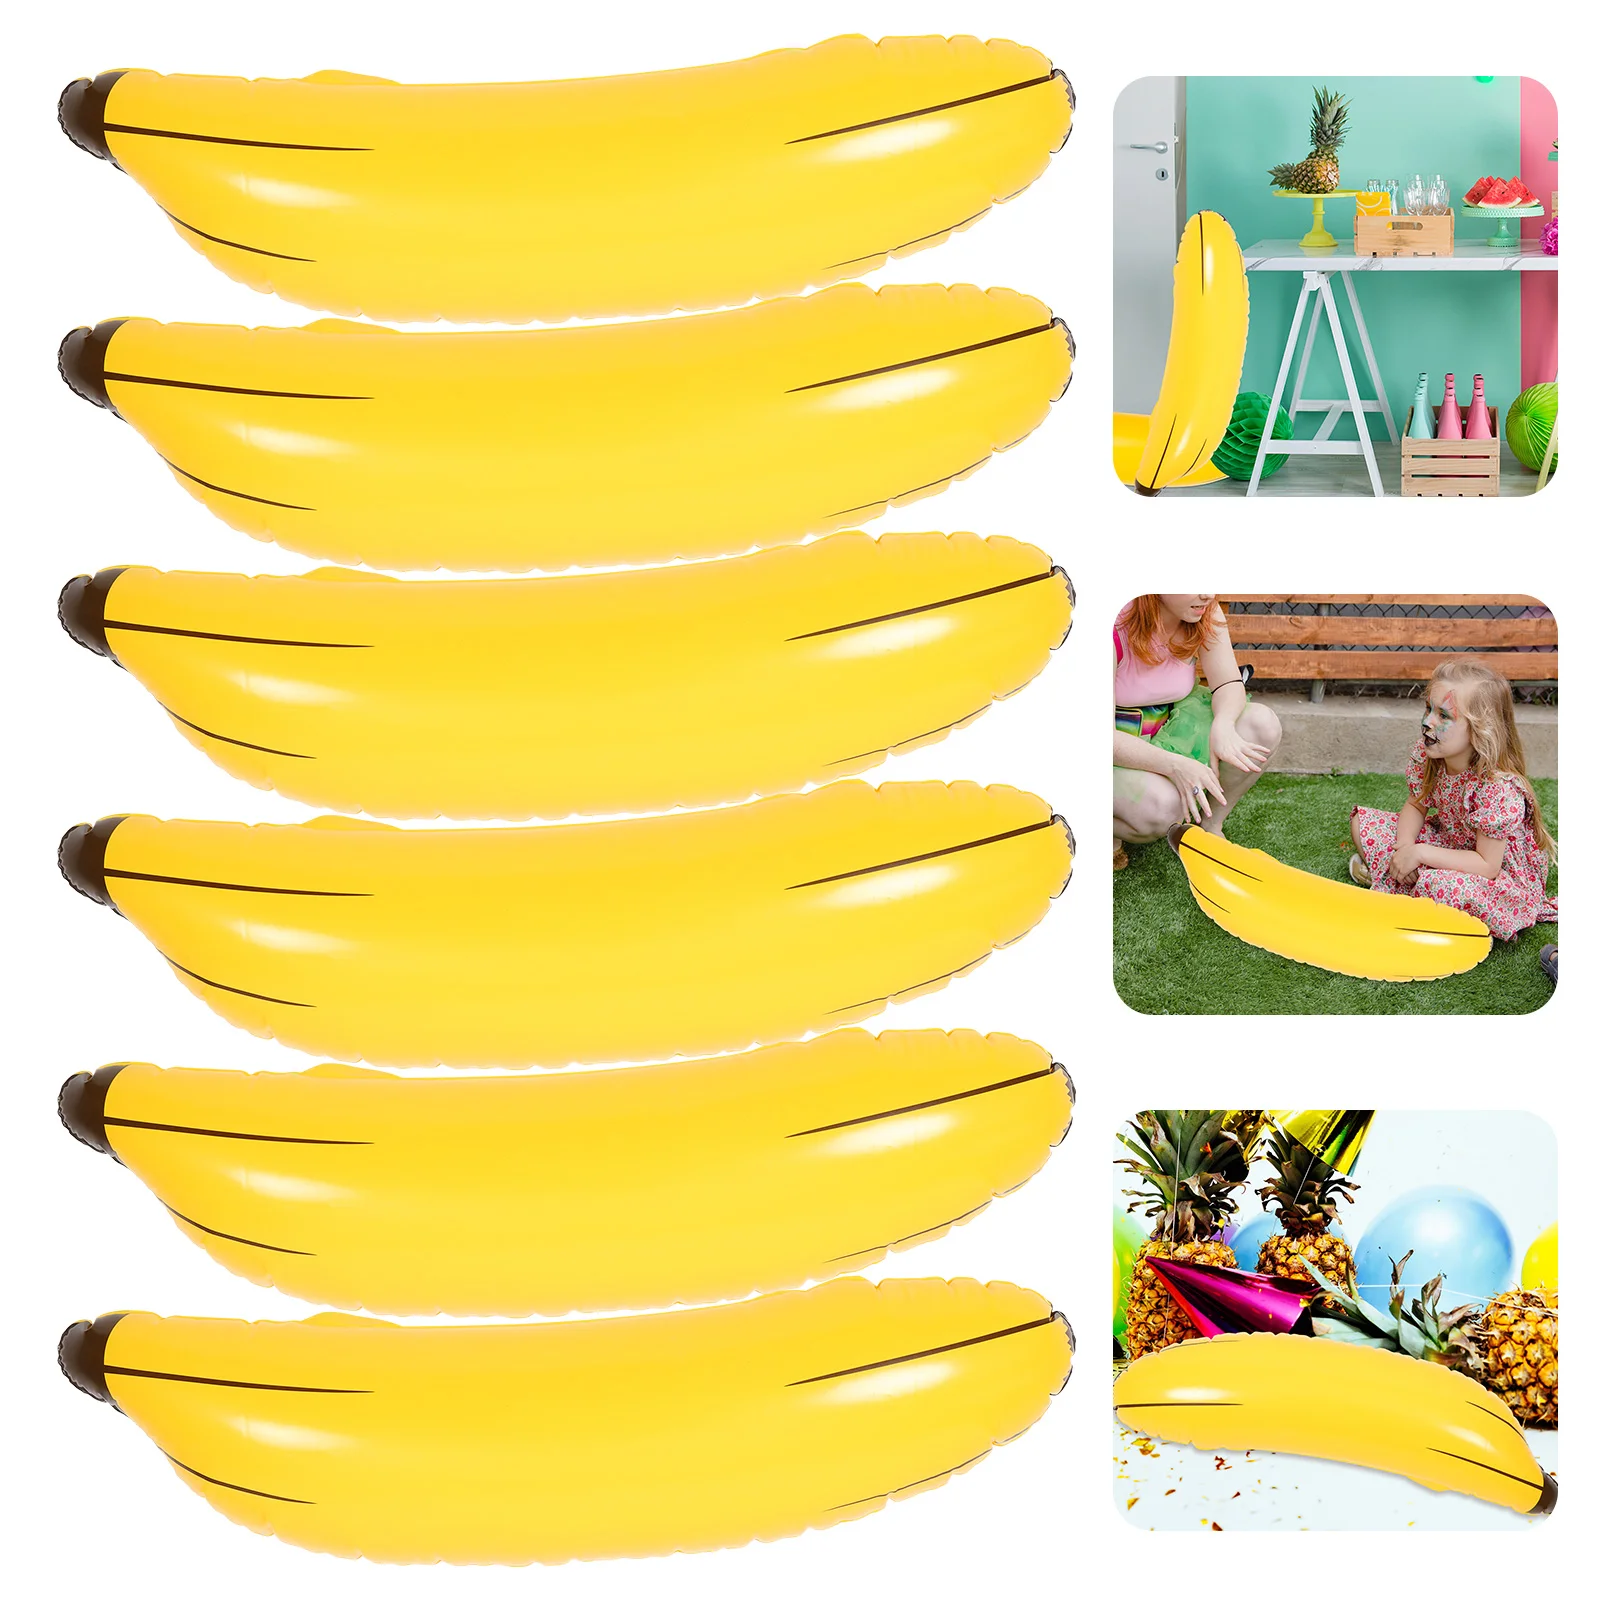 

6 Pcs Inflatable Banana Props Float Plastic Toy PVC Toys Plaything Creative Model